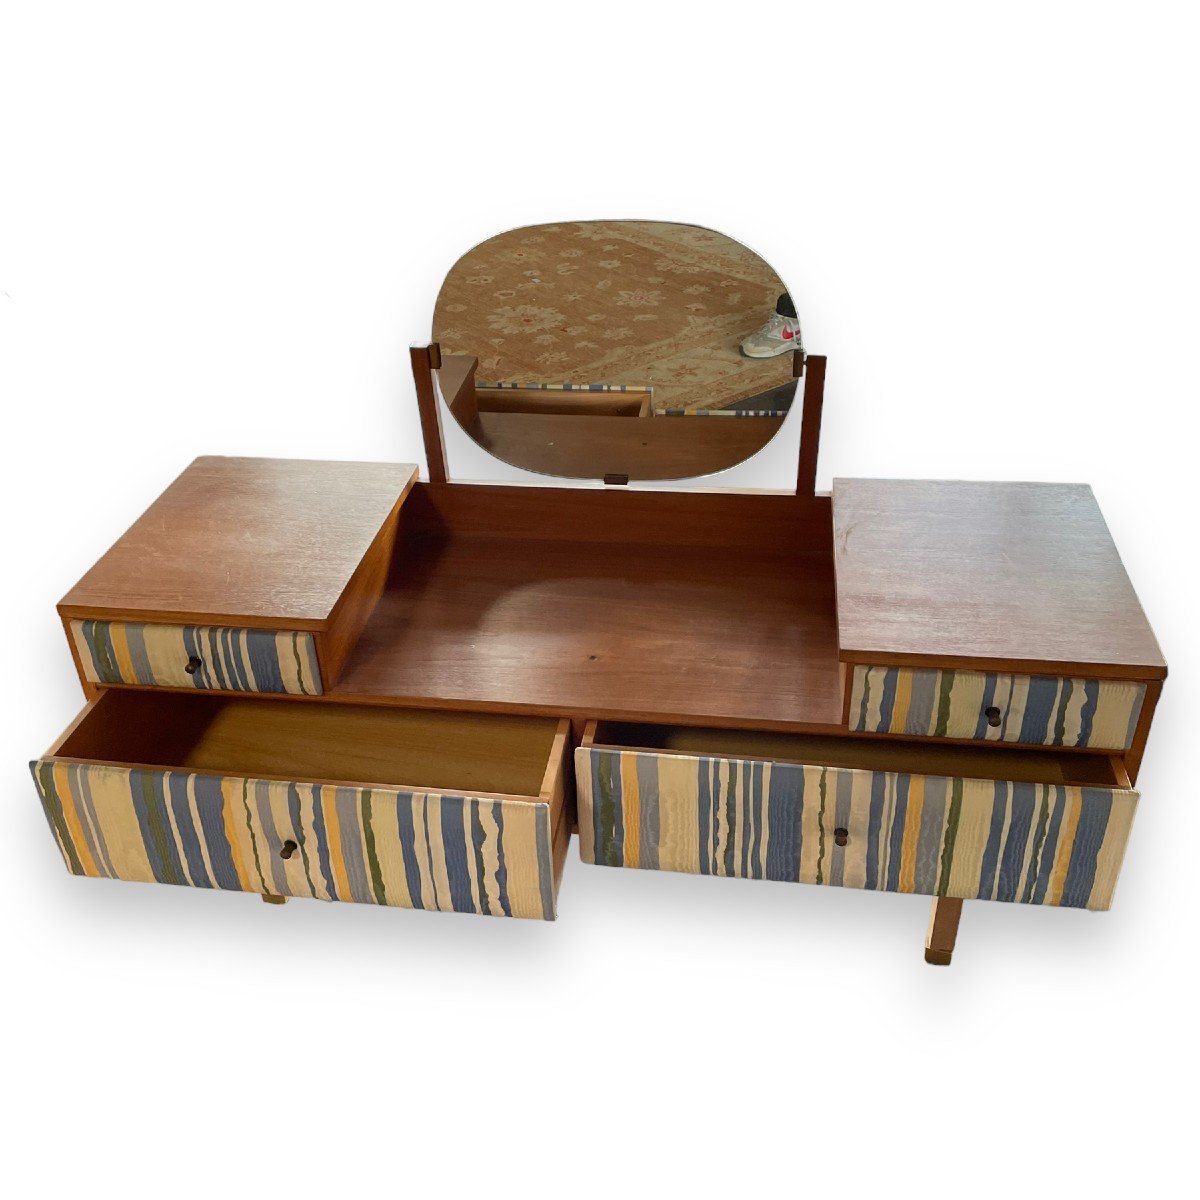 Pierre Paulin Dressing Table In Natural Wood And Fabrics